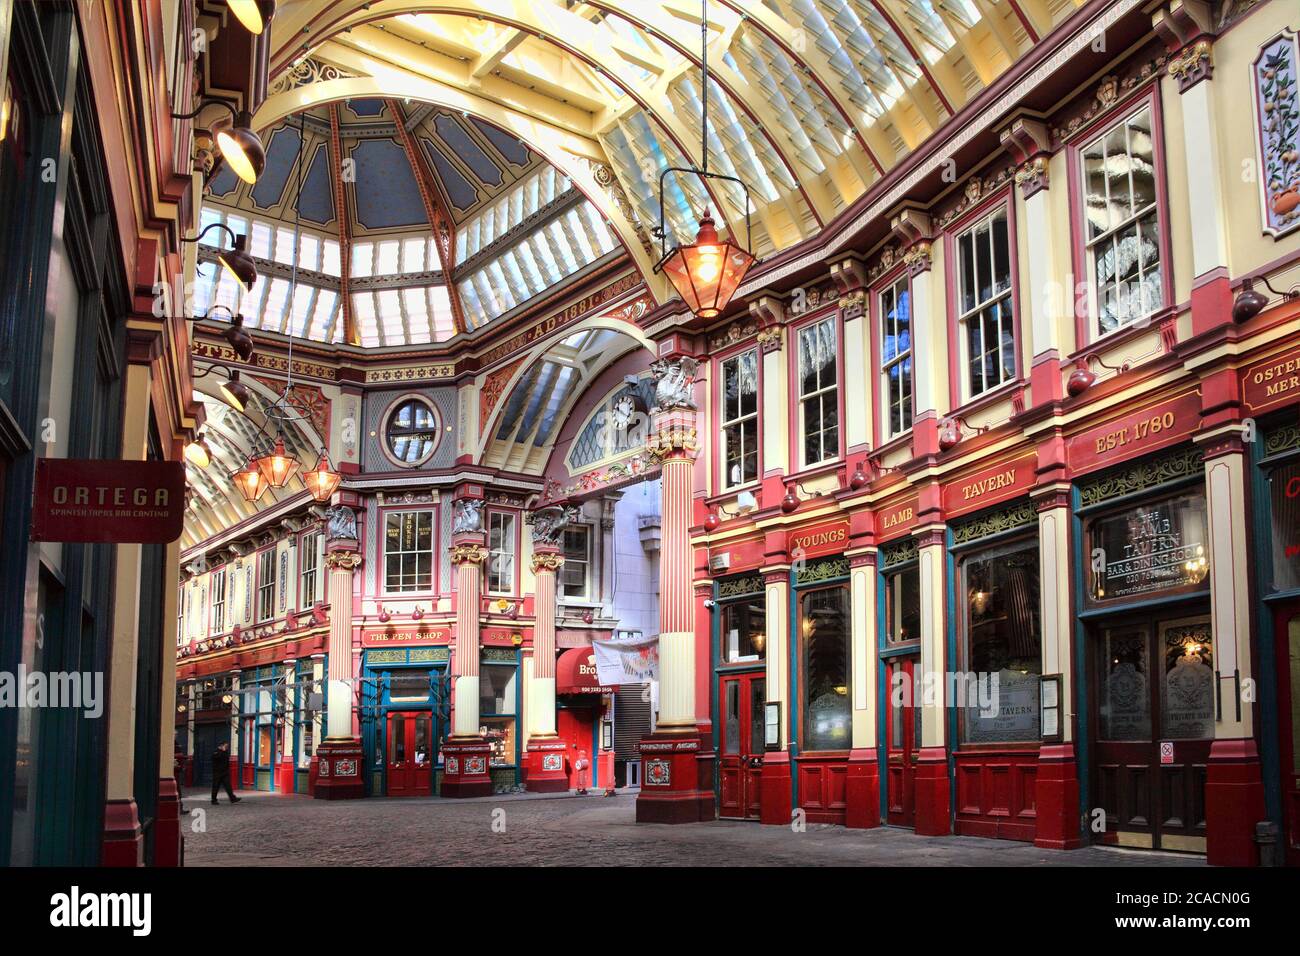 London, UK, March 19, 2011 :  Leadenhall Market in Gracechurch Street which has a covered roof and sells mainly food products is a popular travel dest Stock Photo